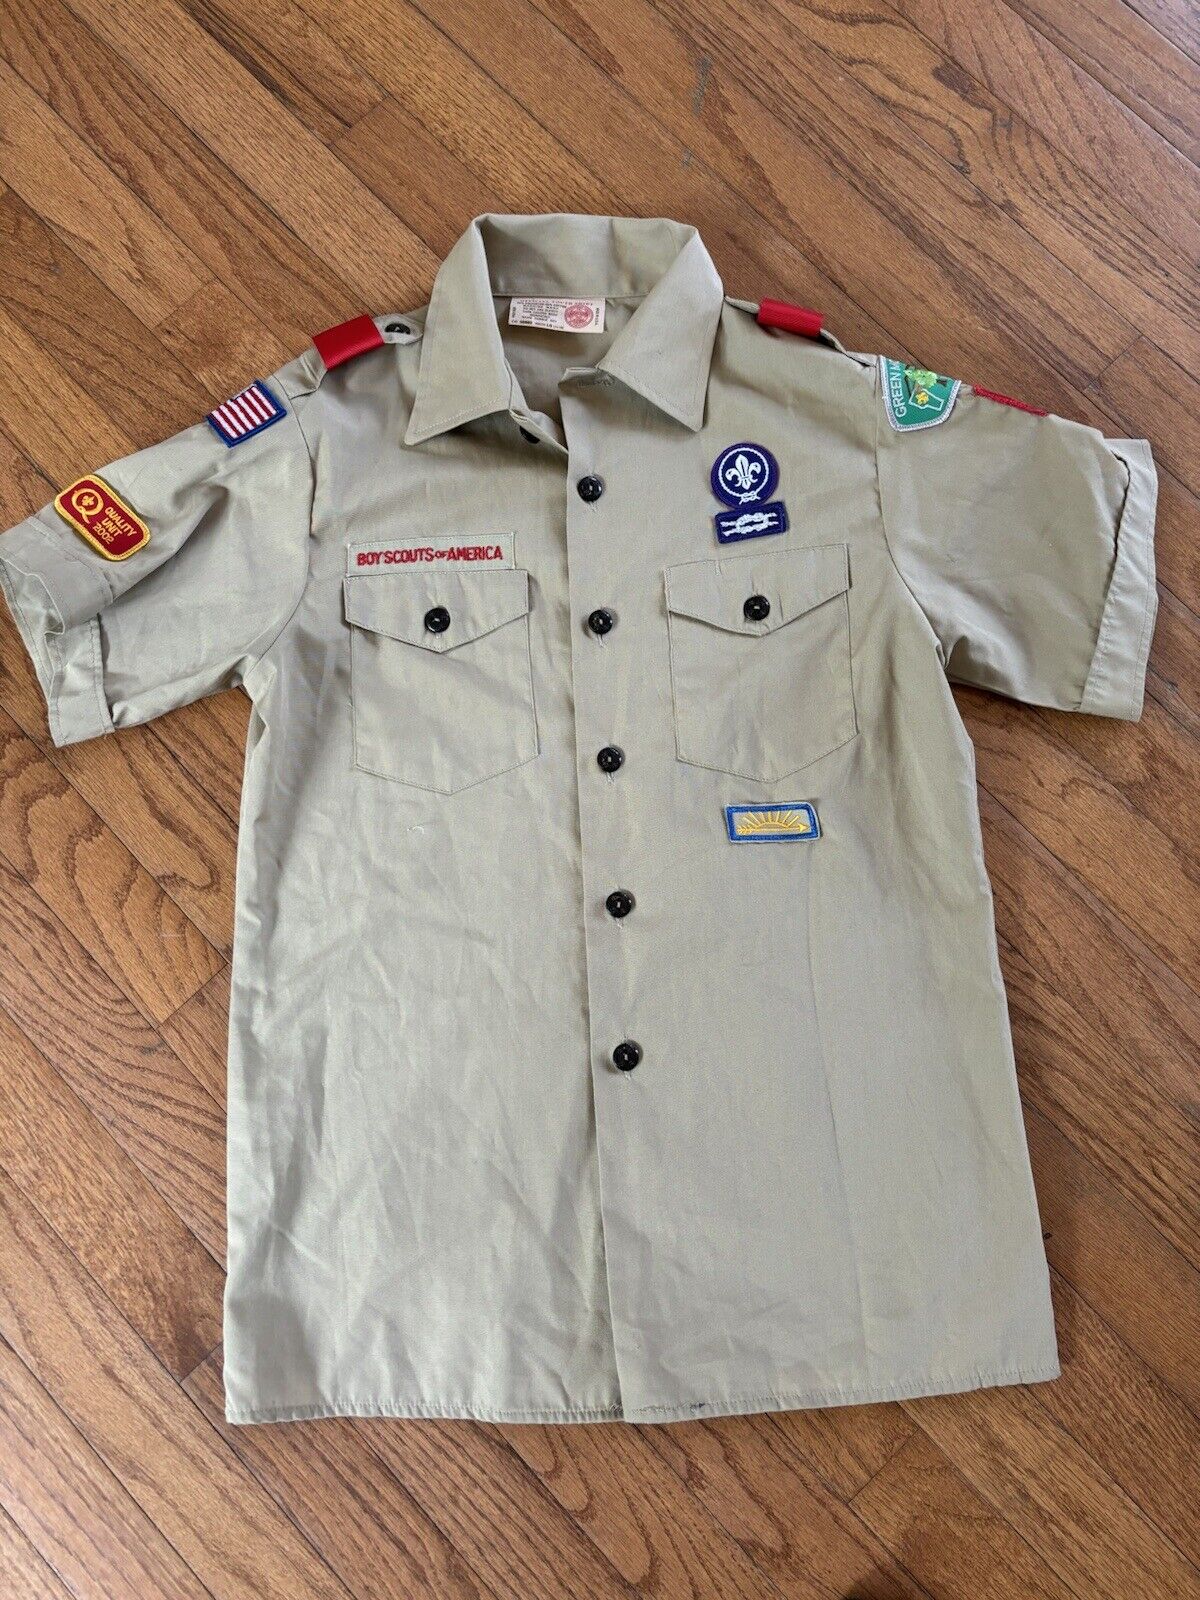 Vintage Boy Scouts Youth Shirt Vermont Patches Quality Unit Large 14-16